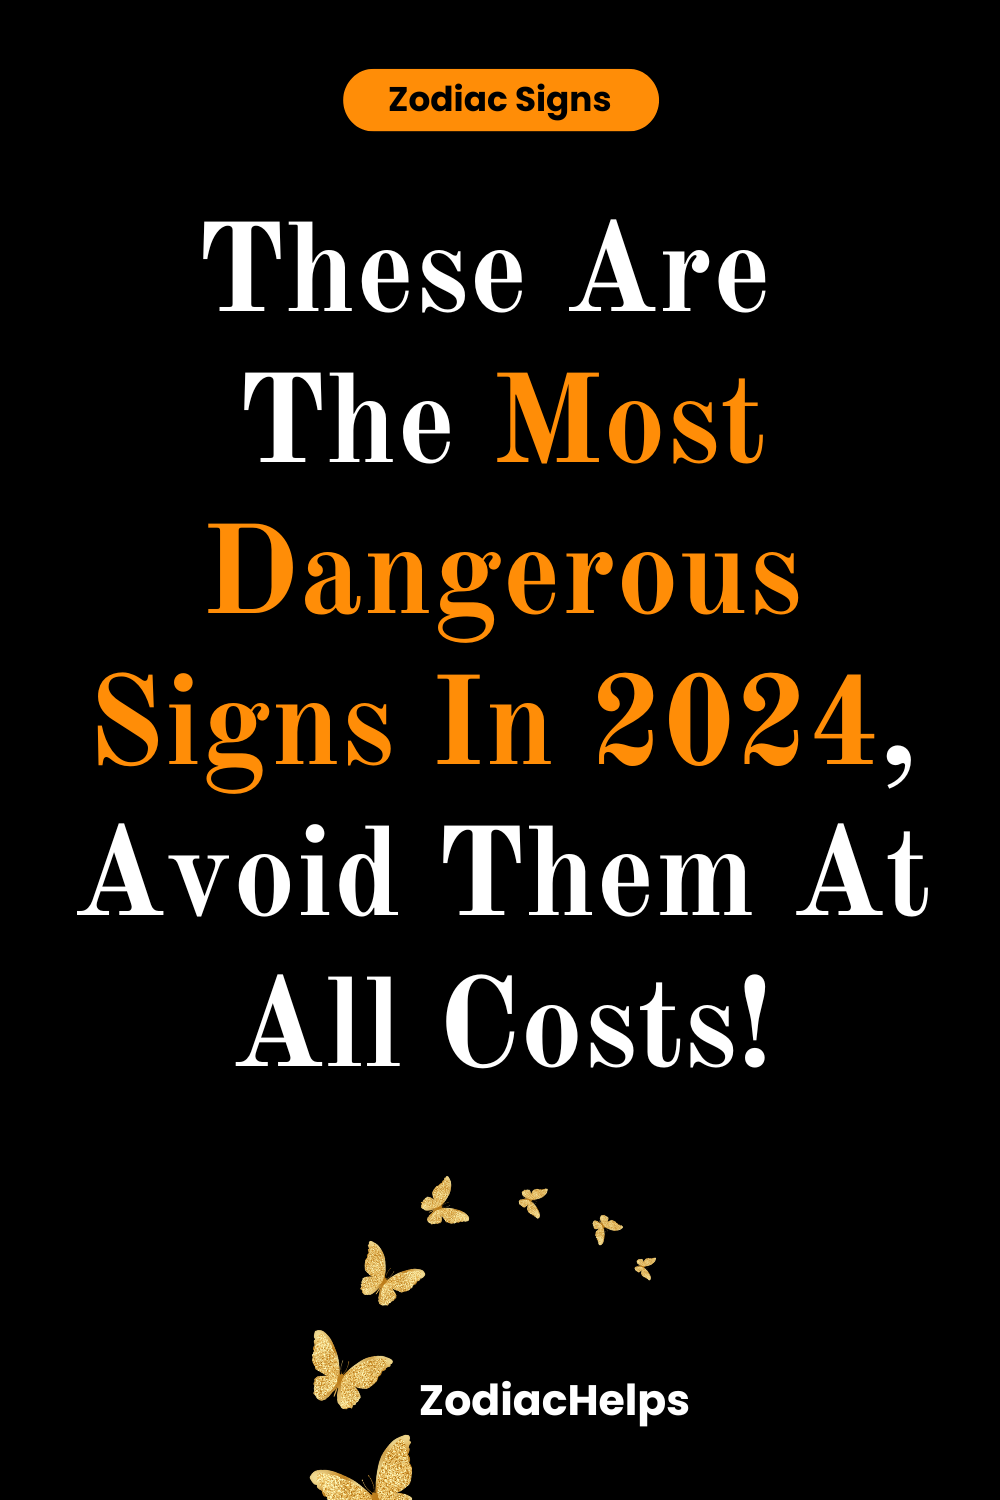 These Are The Most Dangerous Signs In 2024, Avoid Them At All Costs!